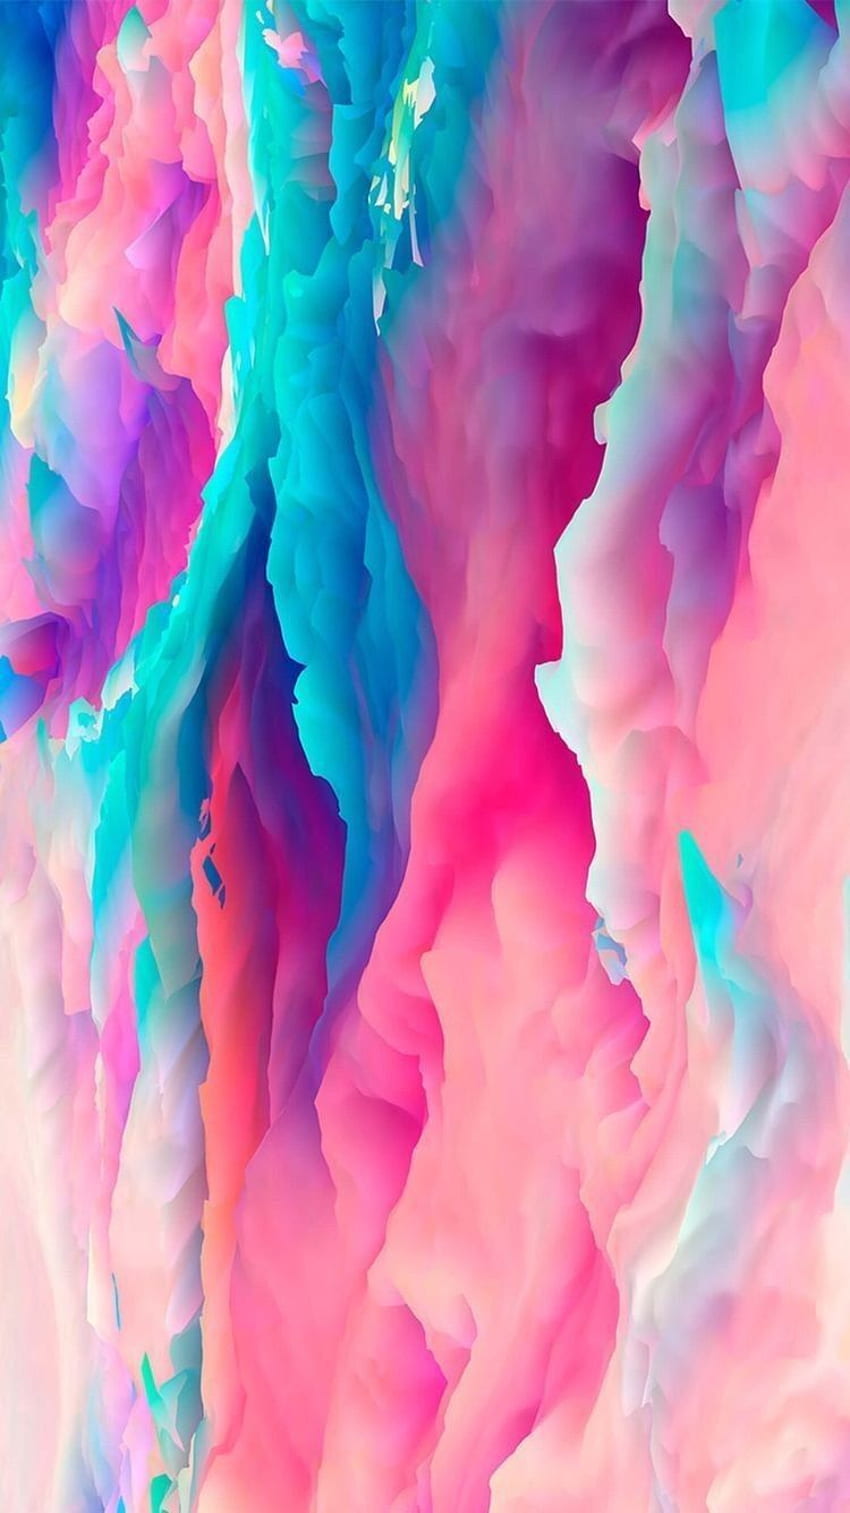 2600+] Colorful Wallpapers | Wallpapers.com